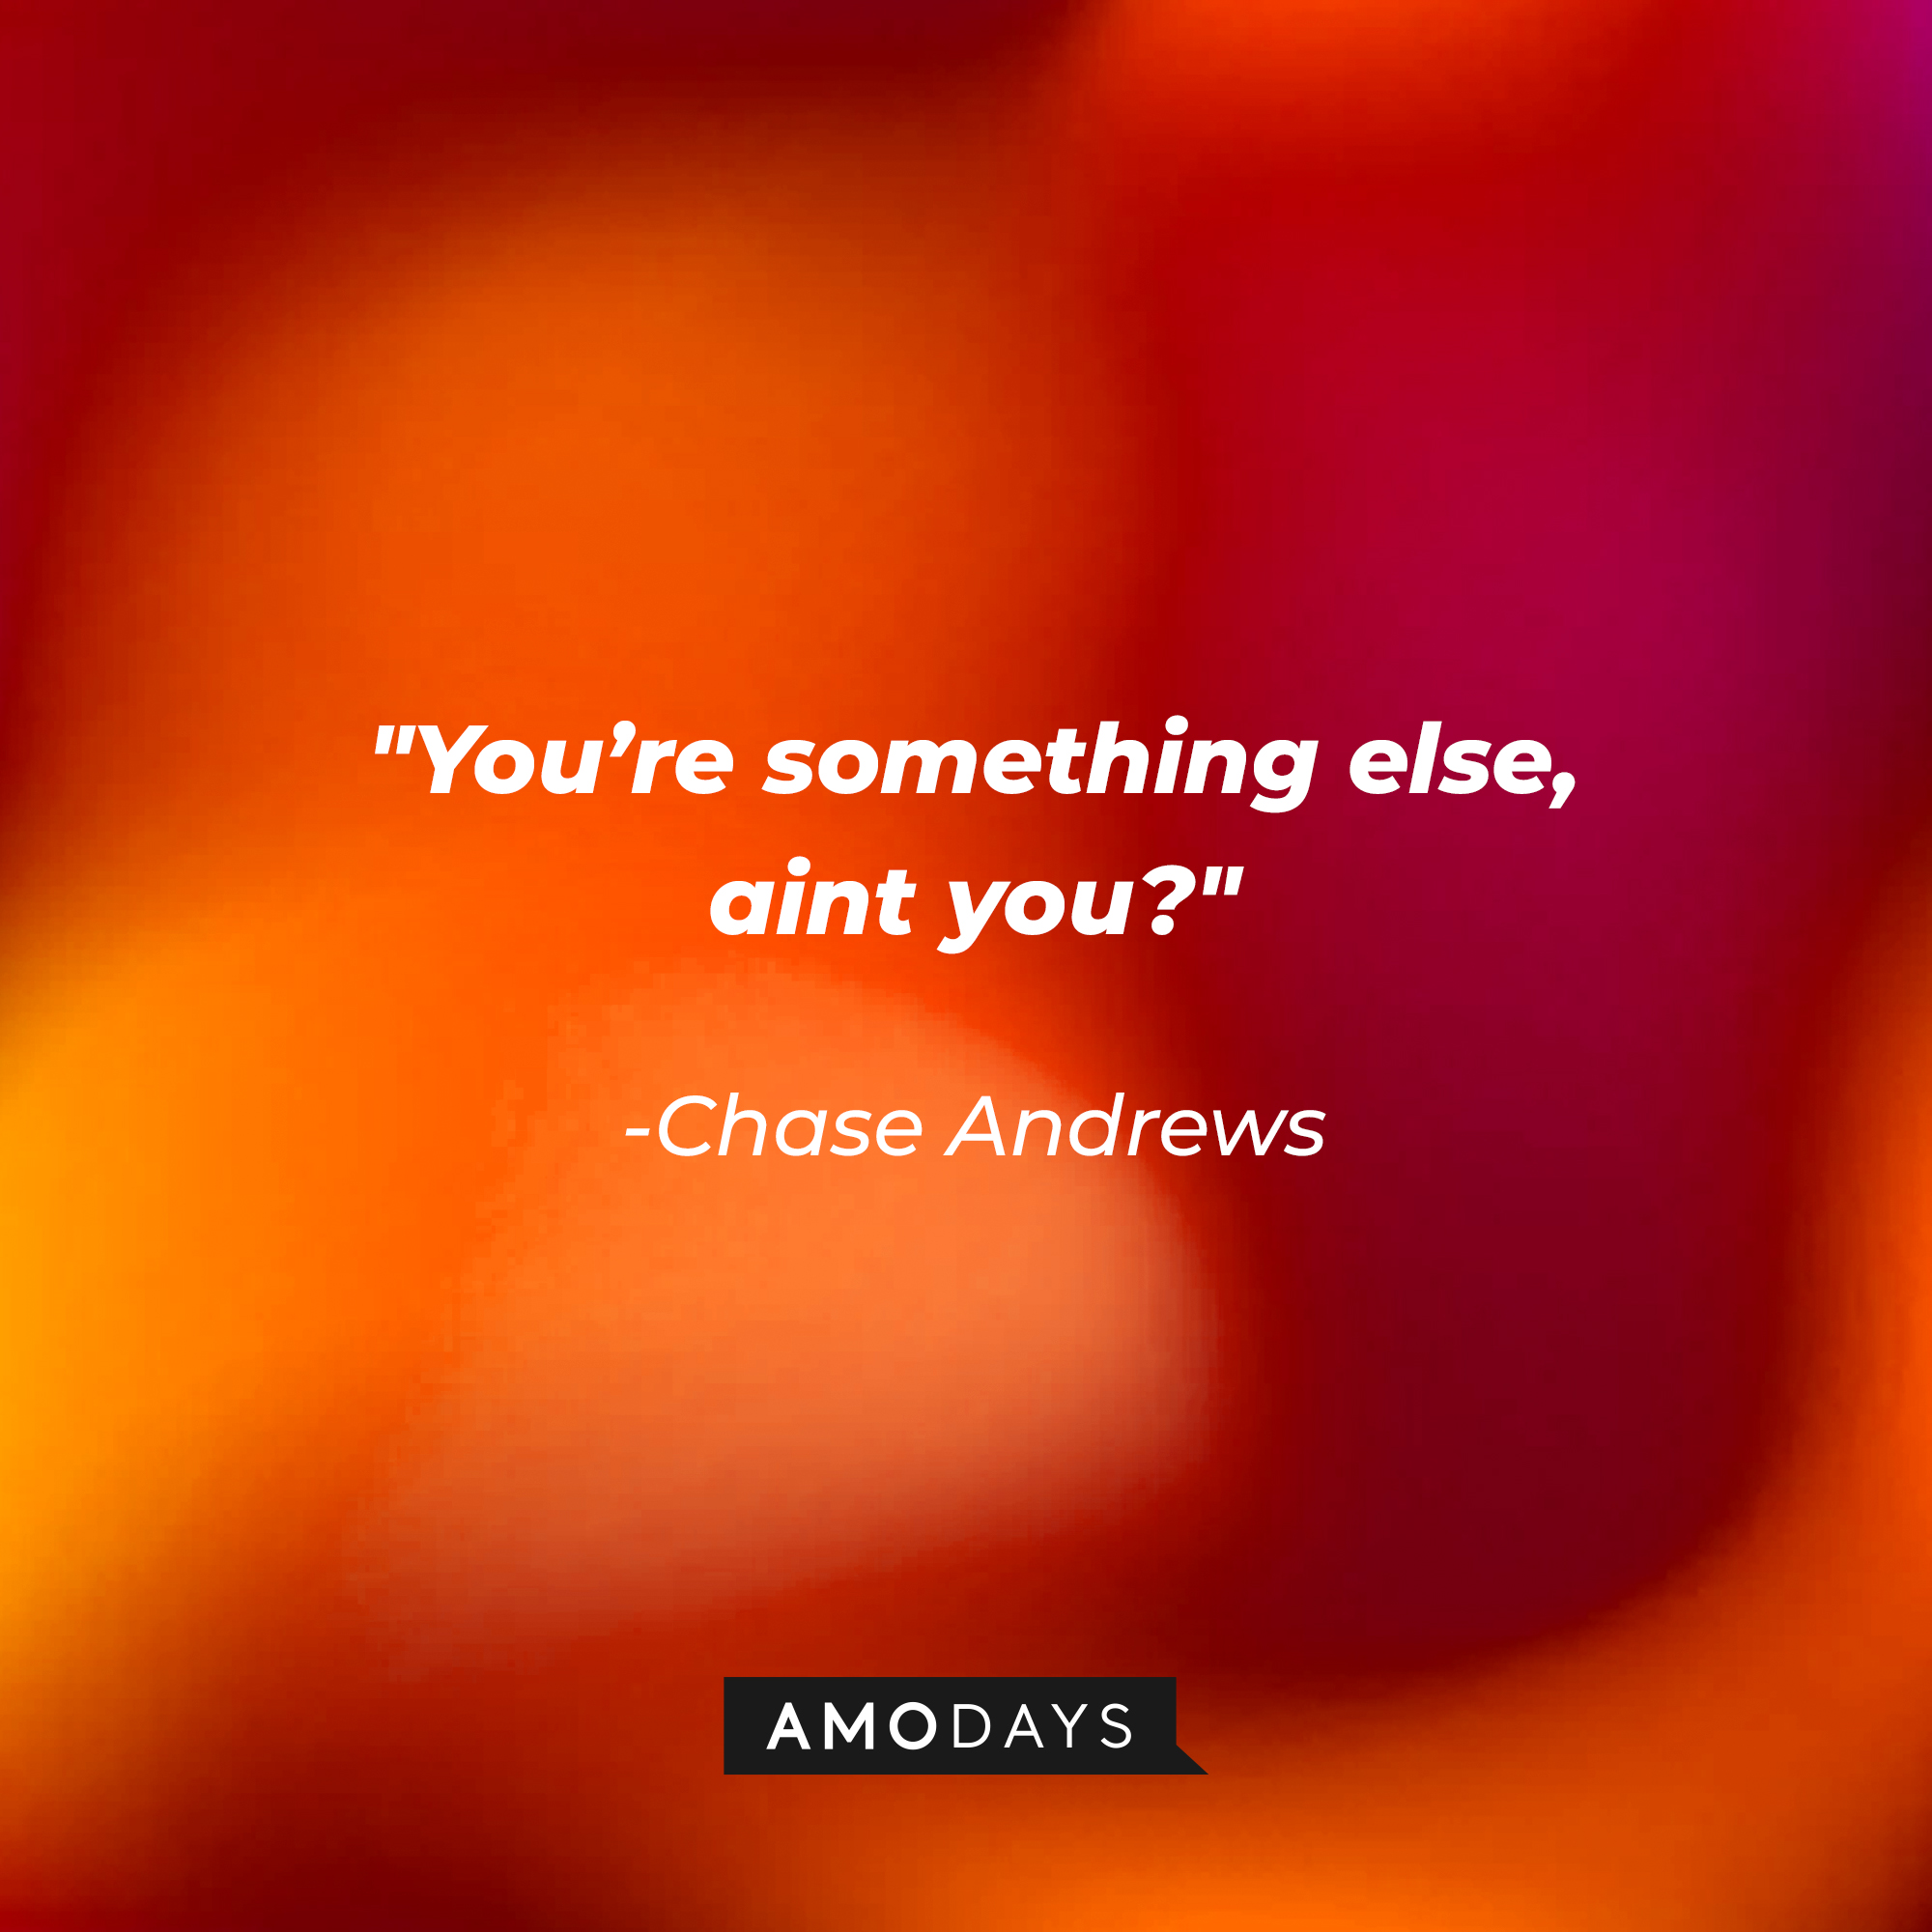 Chase Andrew’s quote: “You’re something else, aint you?”│Source: AmoDays